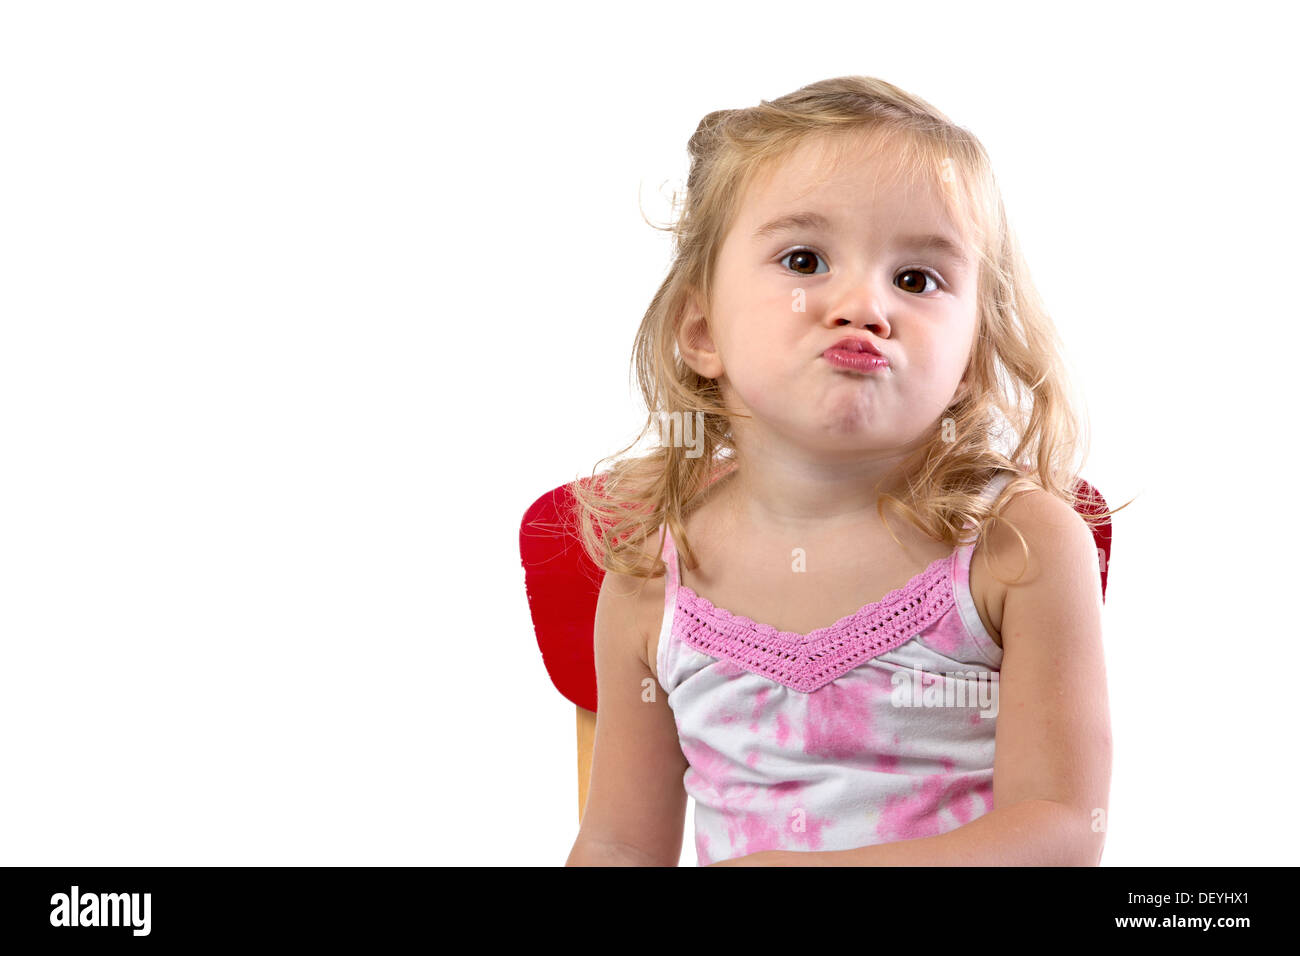 Toddler girl very bored her lips and shoulders are showing the the boredom Stock Photo